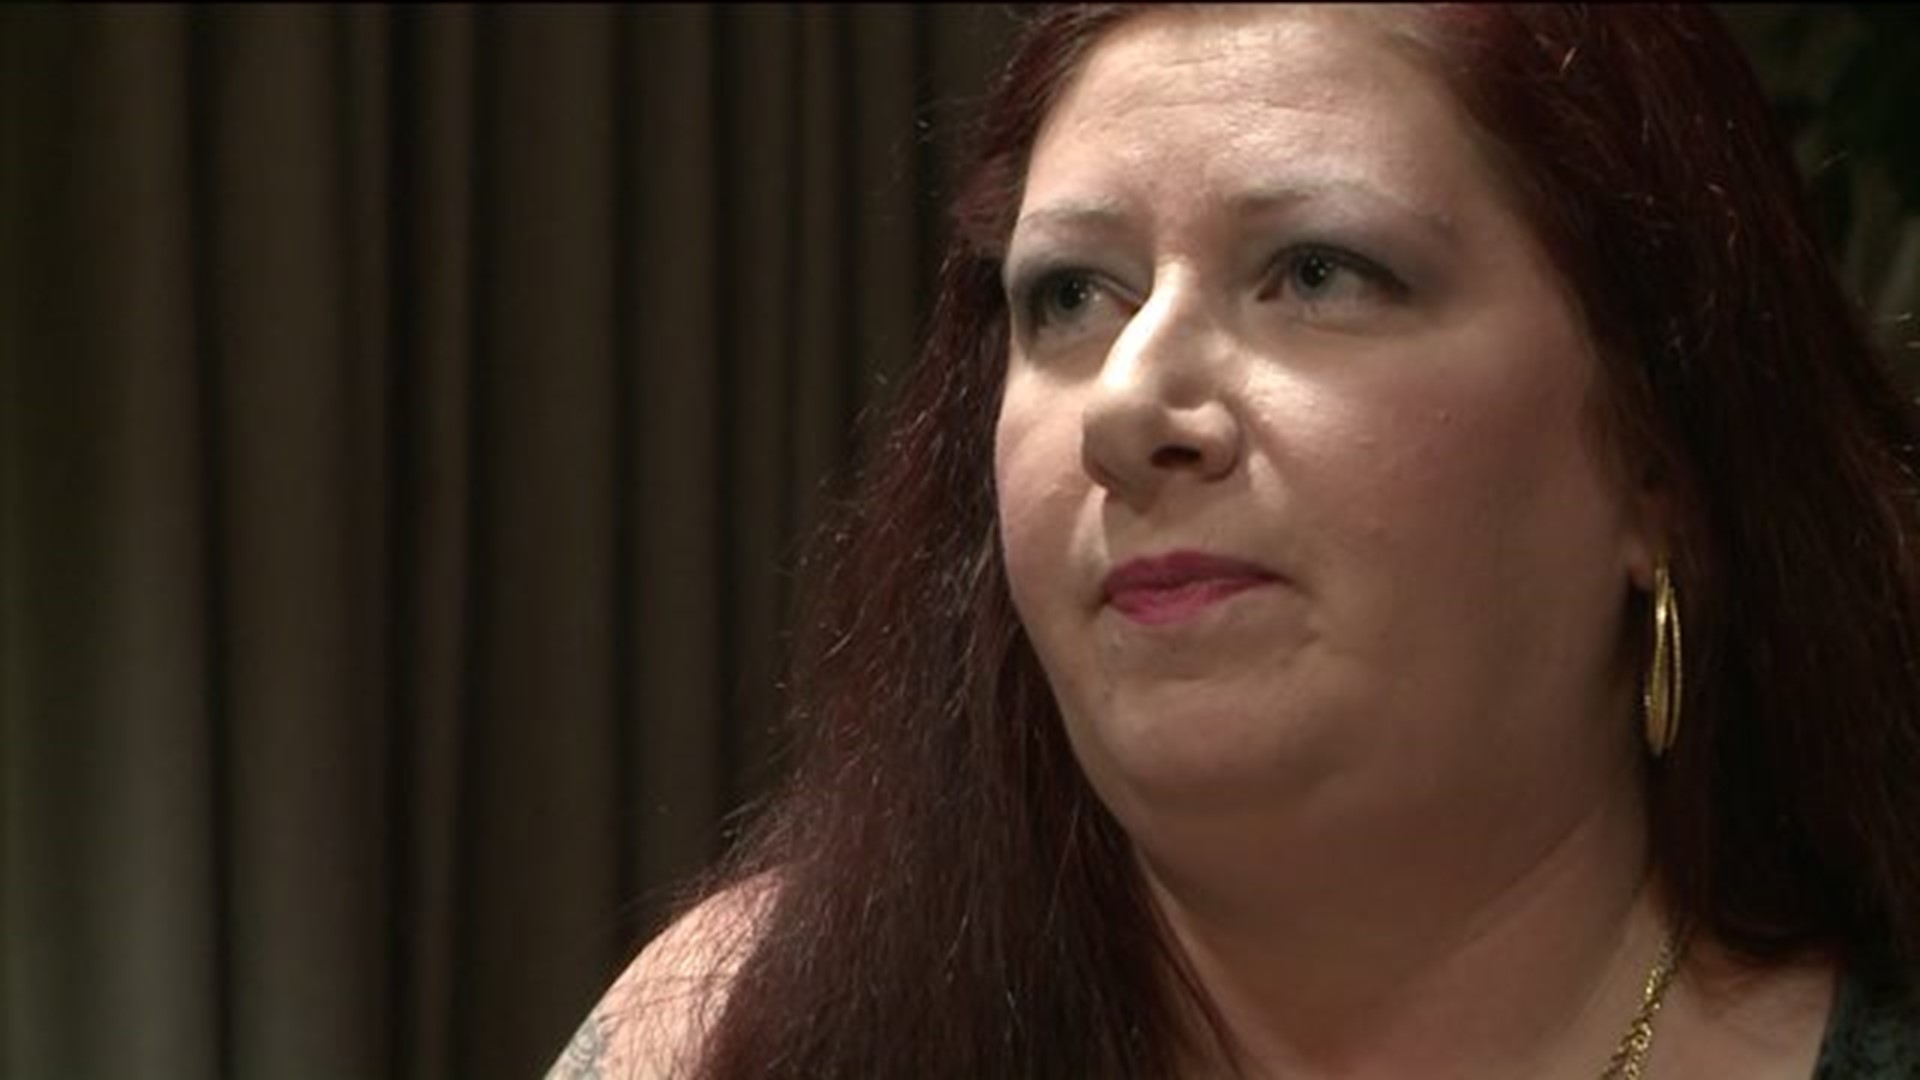 EXCLUSIVE: Victim of convicted murder, rapist, speaks out for the first time